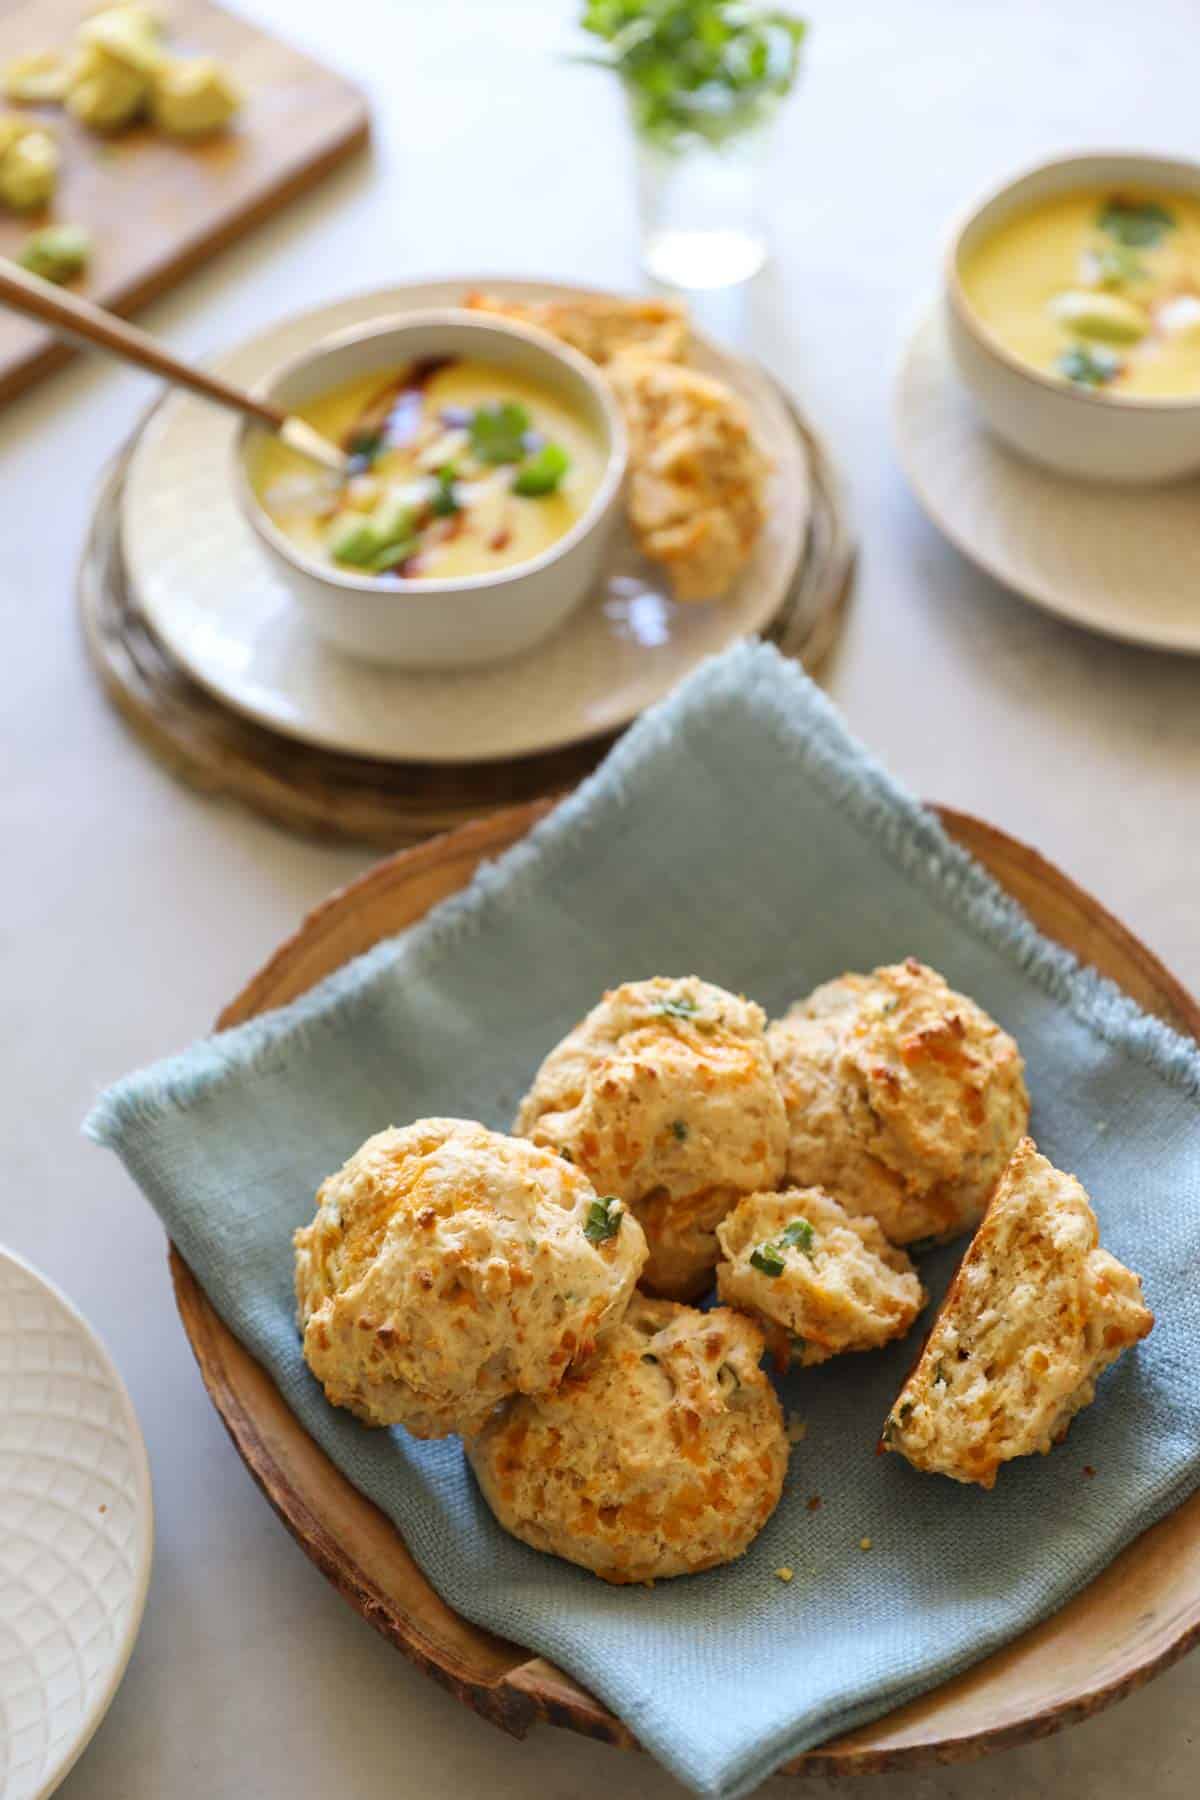 a scene of bowls of corn soup served with cheddar biscuits